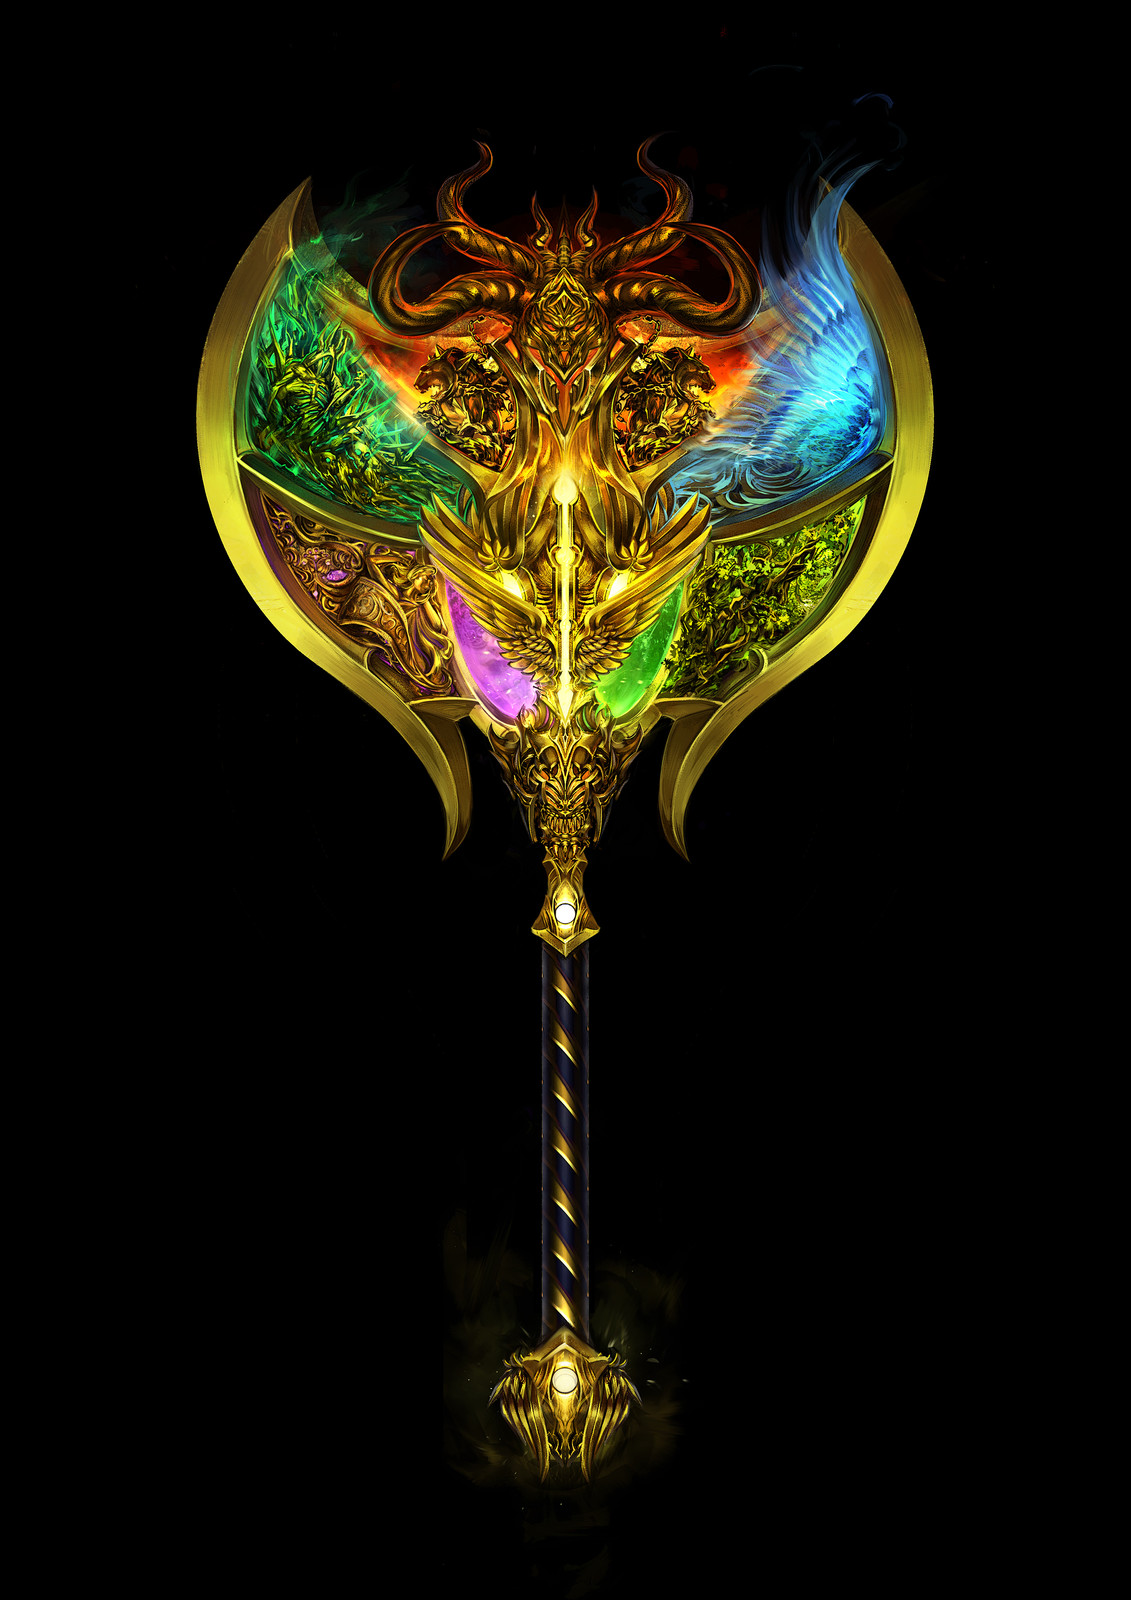 The axe is improved version of my submission for Arenanet's Design-a-Weapon Contest. 
Additionally I've designed weapon collection which could be fused together to create this ultimate weapon.